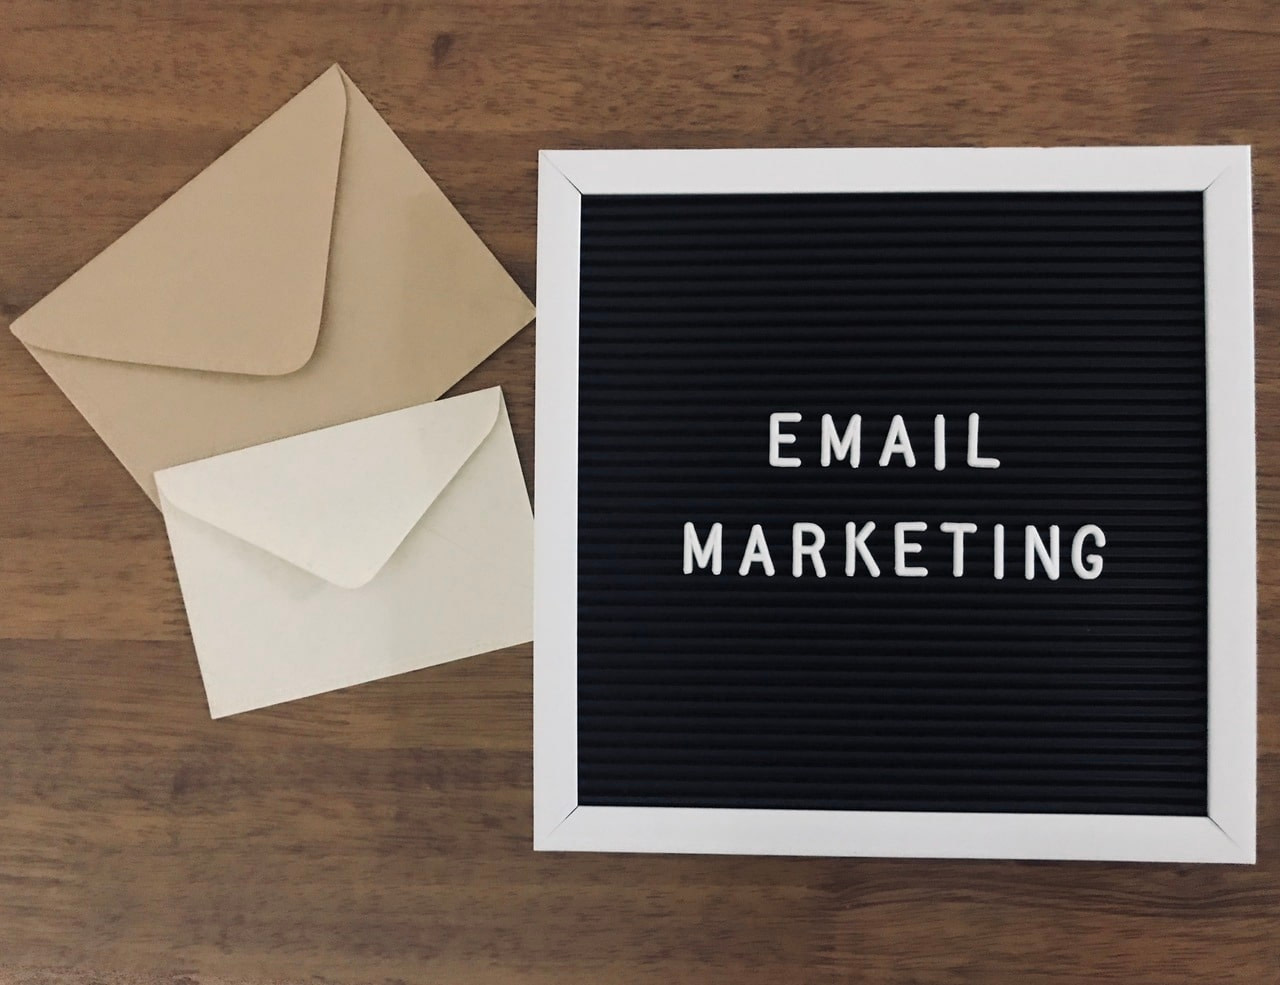 Two envelopes, one smaller white one bigger brown. Words "Email Marketing" written in all capital letters on square blackboard with white frame.